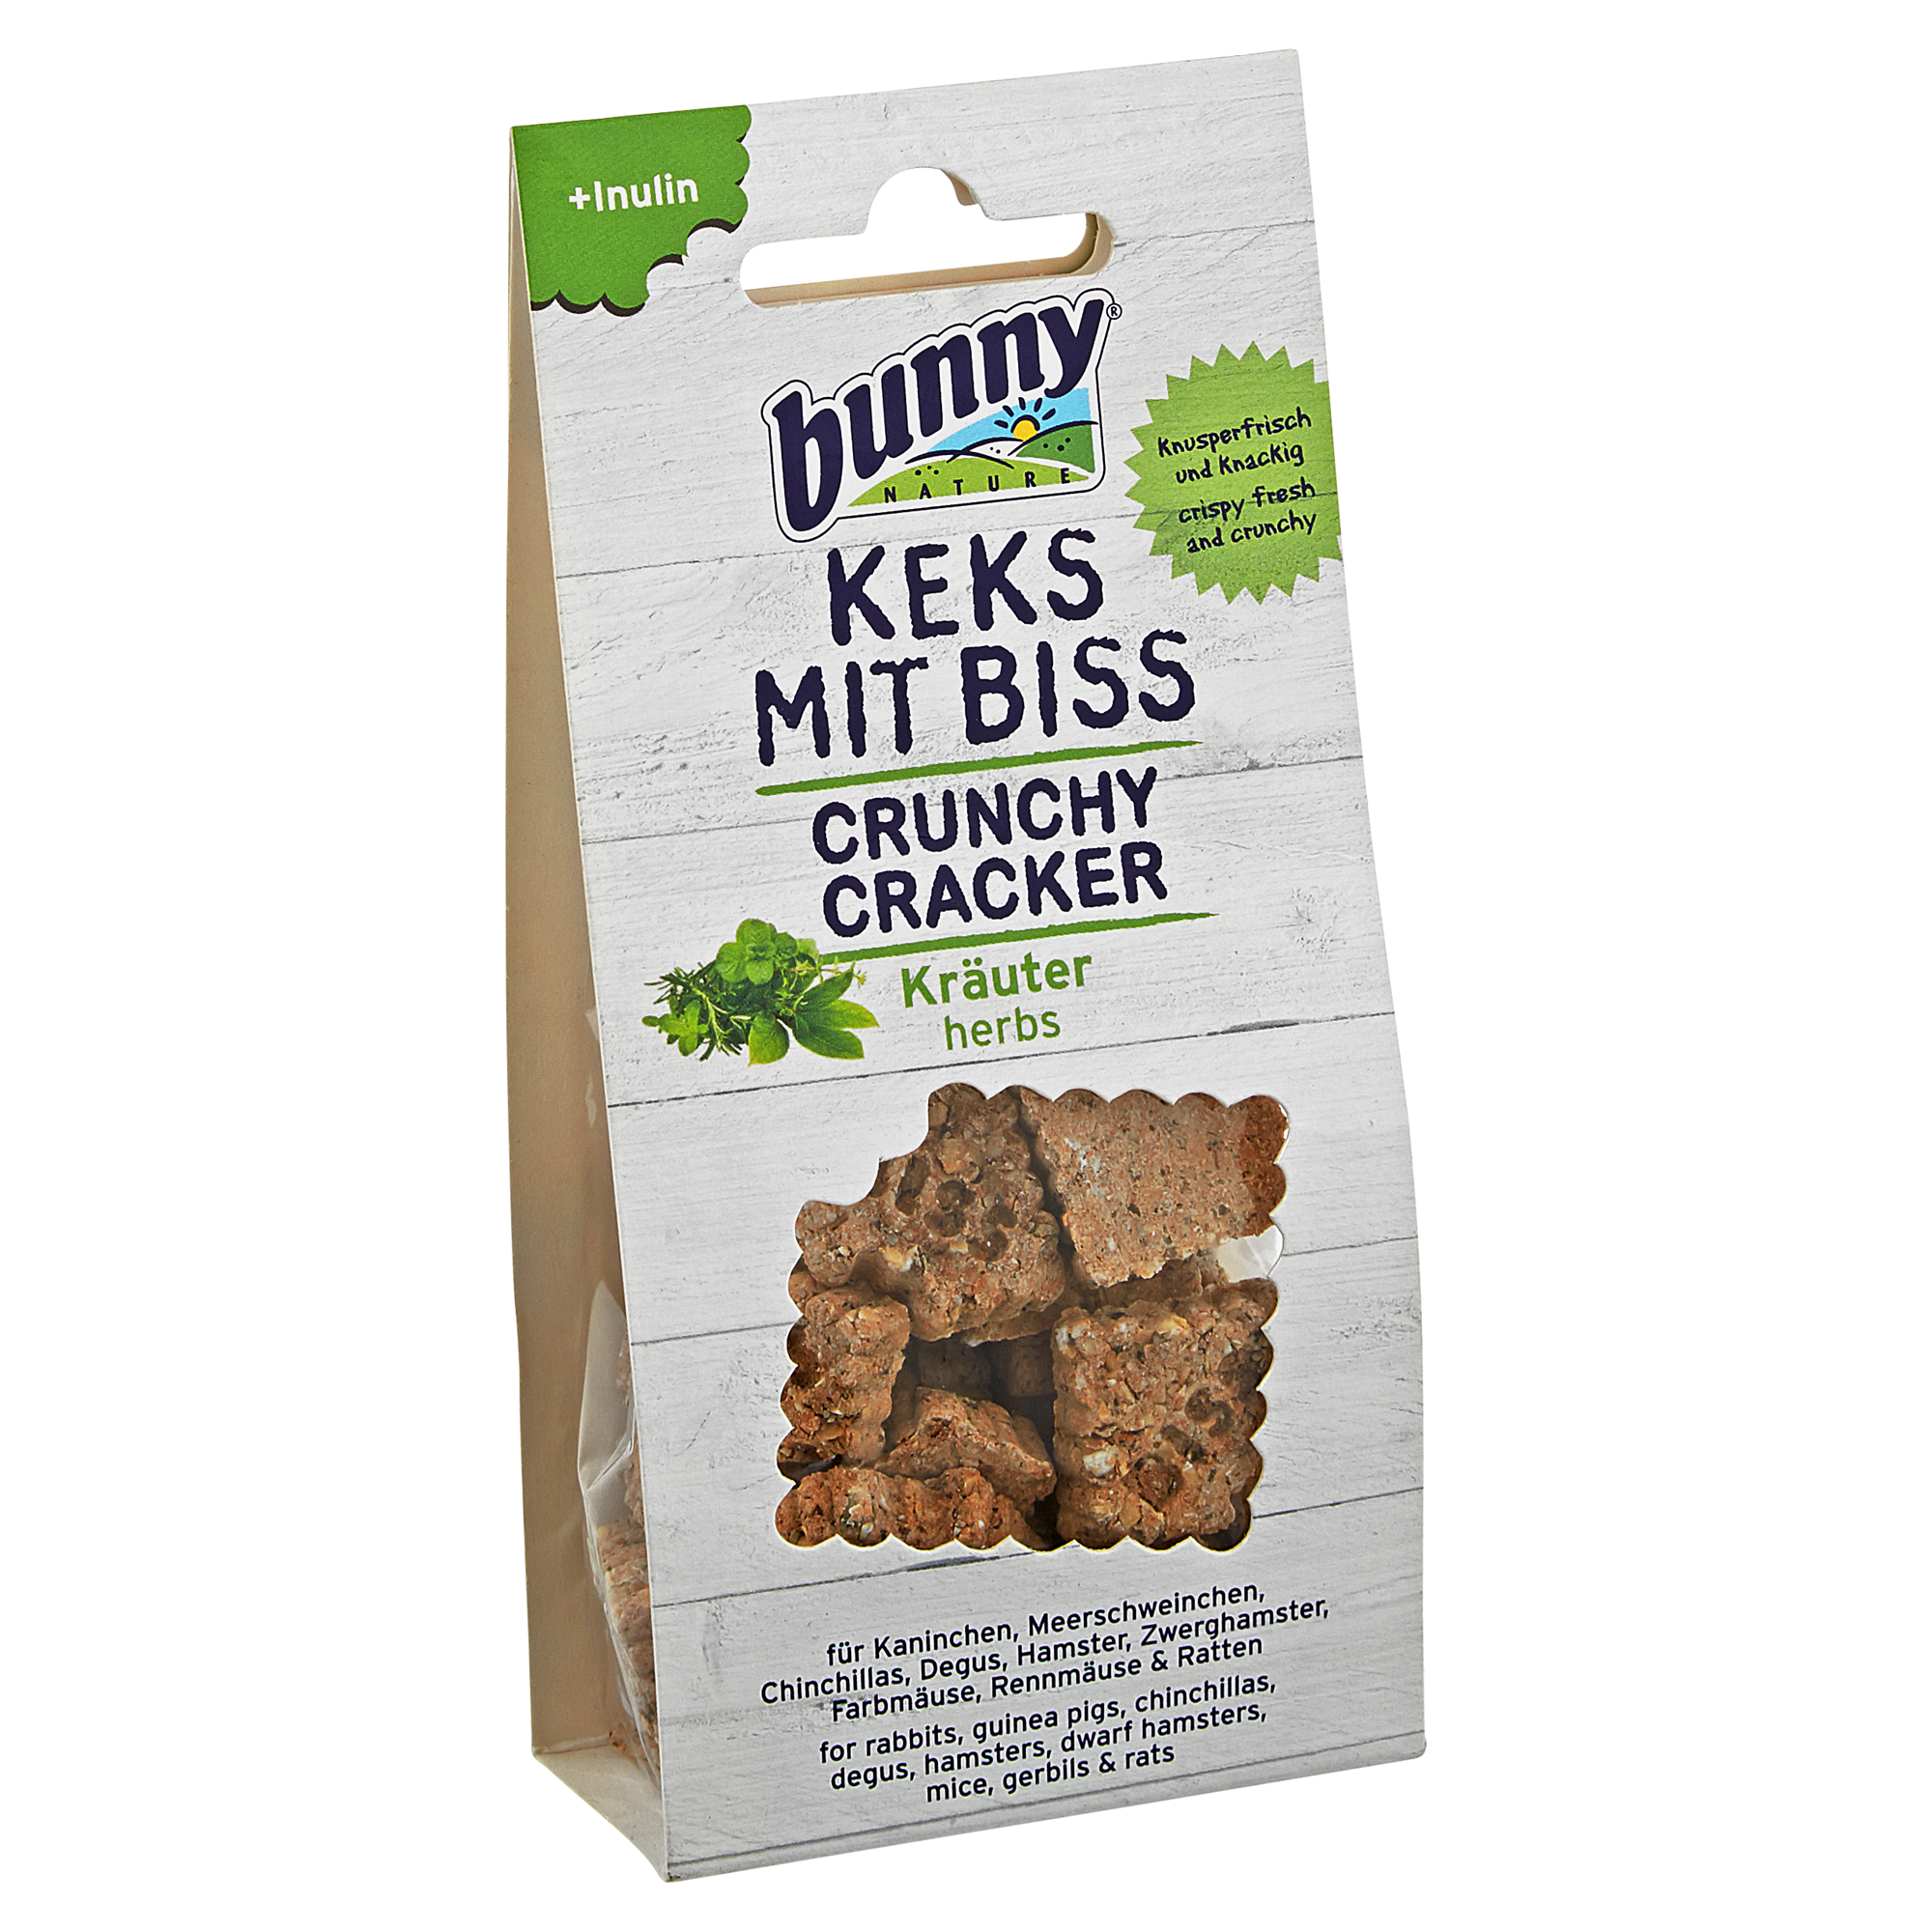 Nagerfutter "Keks mit Biss" 50 g Kräuter + product picture